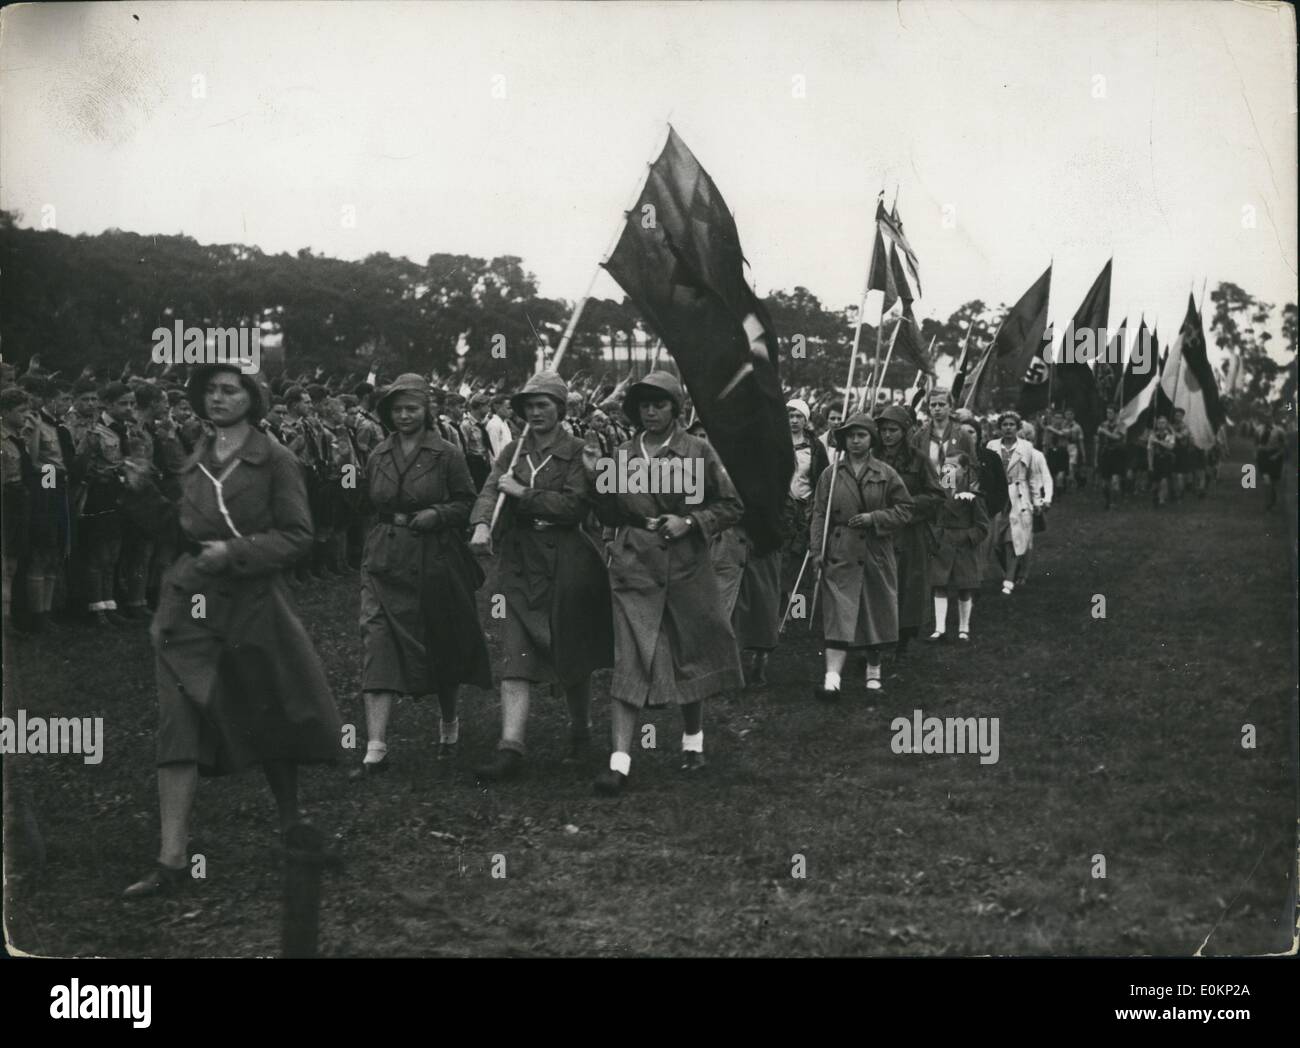 Jun. 06, 1933 - The Gustavus-Adolphus-Day in Berlin: On June 25, 33, the Gustavus-Adolphus-Association of Berlin has invited about 800 members of the Protestant Youth and Church Organizations to the Adolphus-Gustavus -Day on the Tempelhof Field. Photo shows the parade of the Protestant Church organisations. Stock Photo